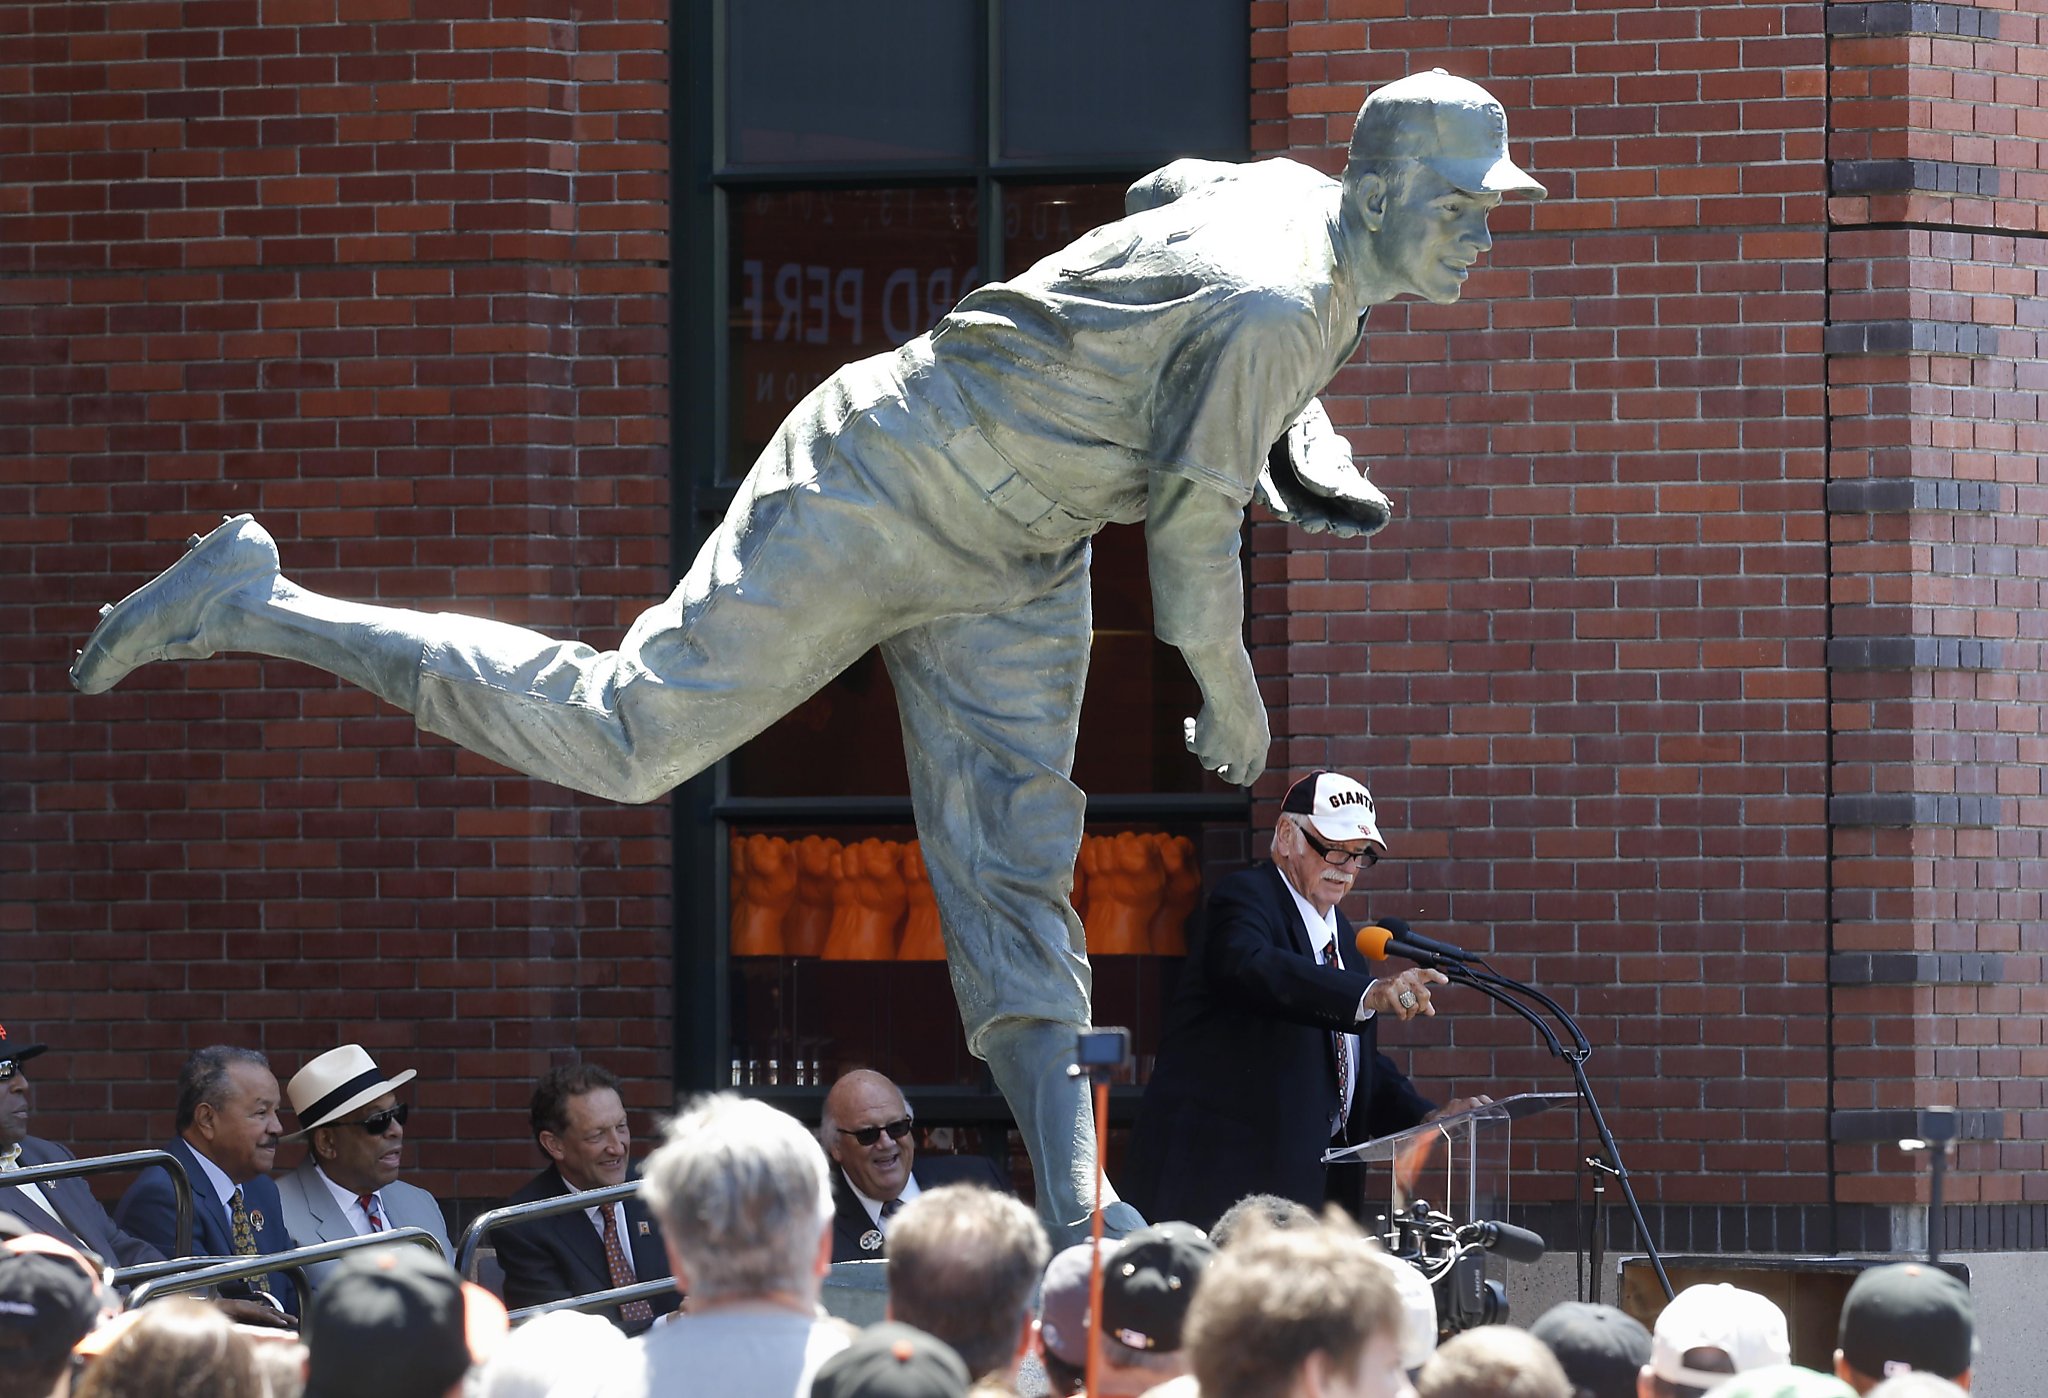 Gaylord Perry joins Giants' bronze greats